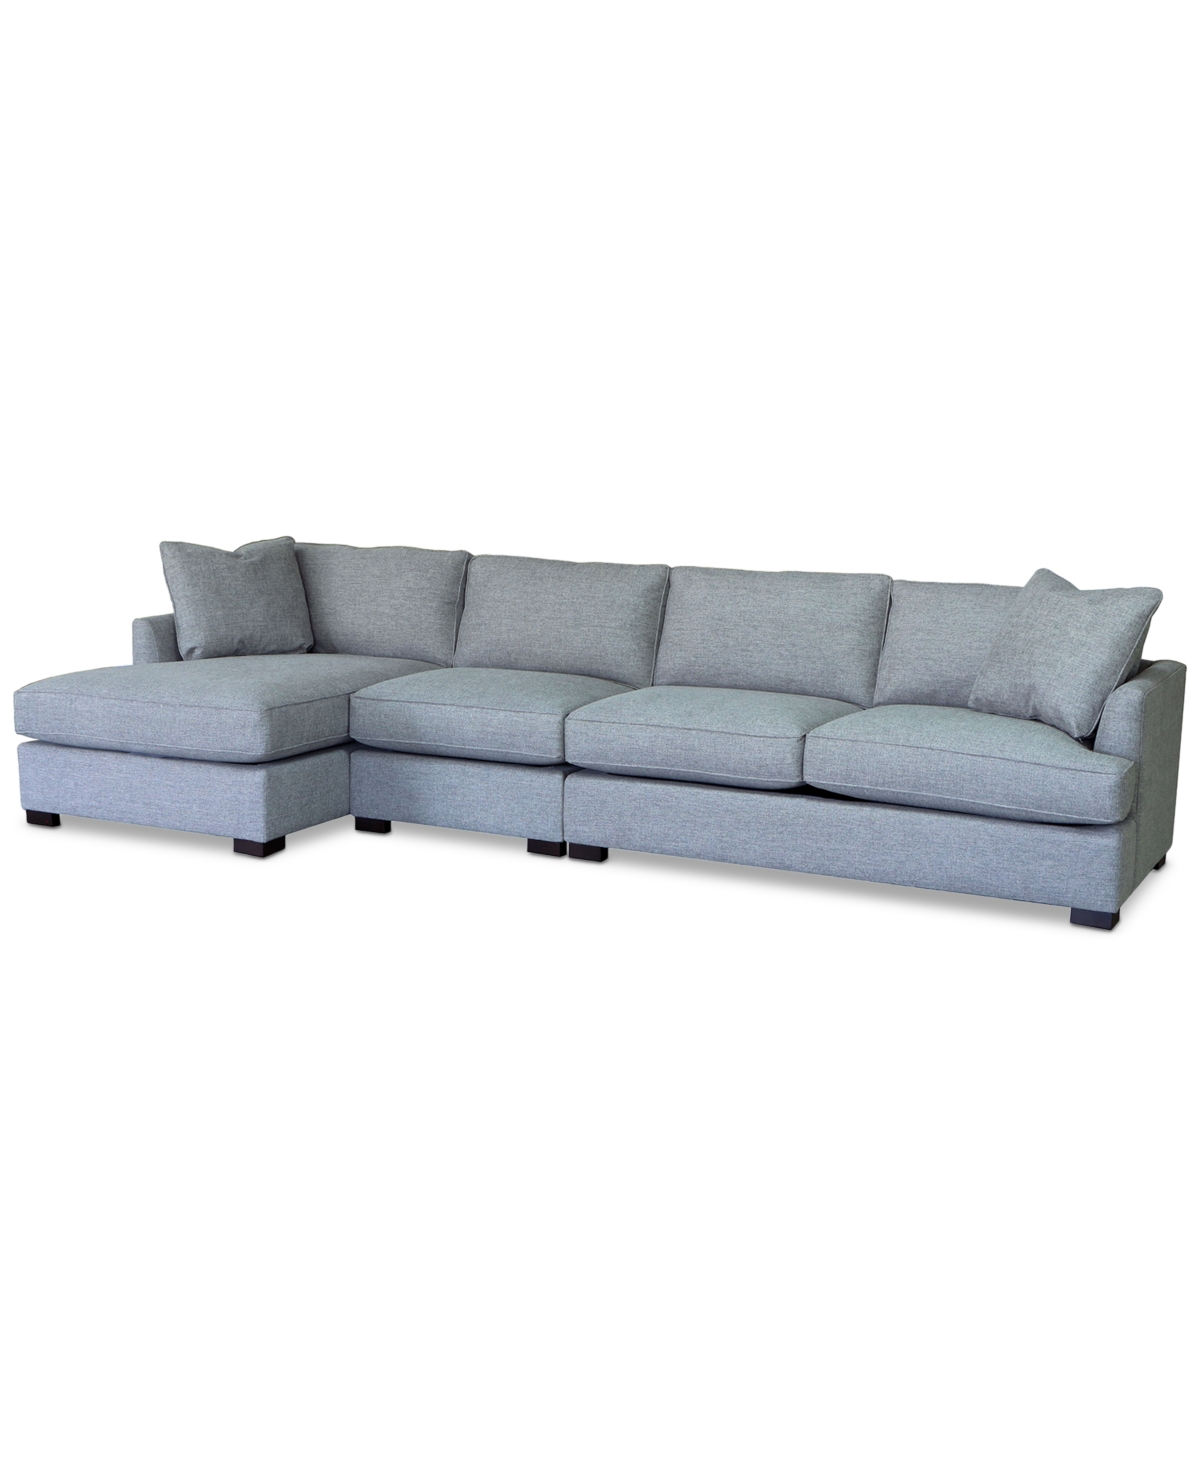 Furniture Nightford 146" 3-pc. Fabric Chaise Sectional, Created For Macy's In Granite